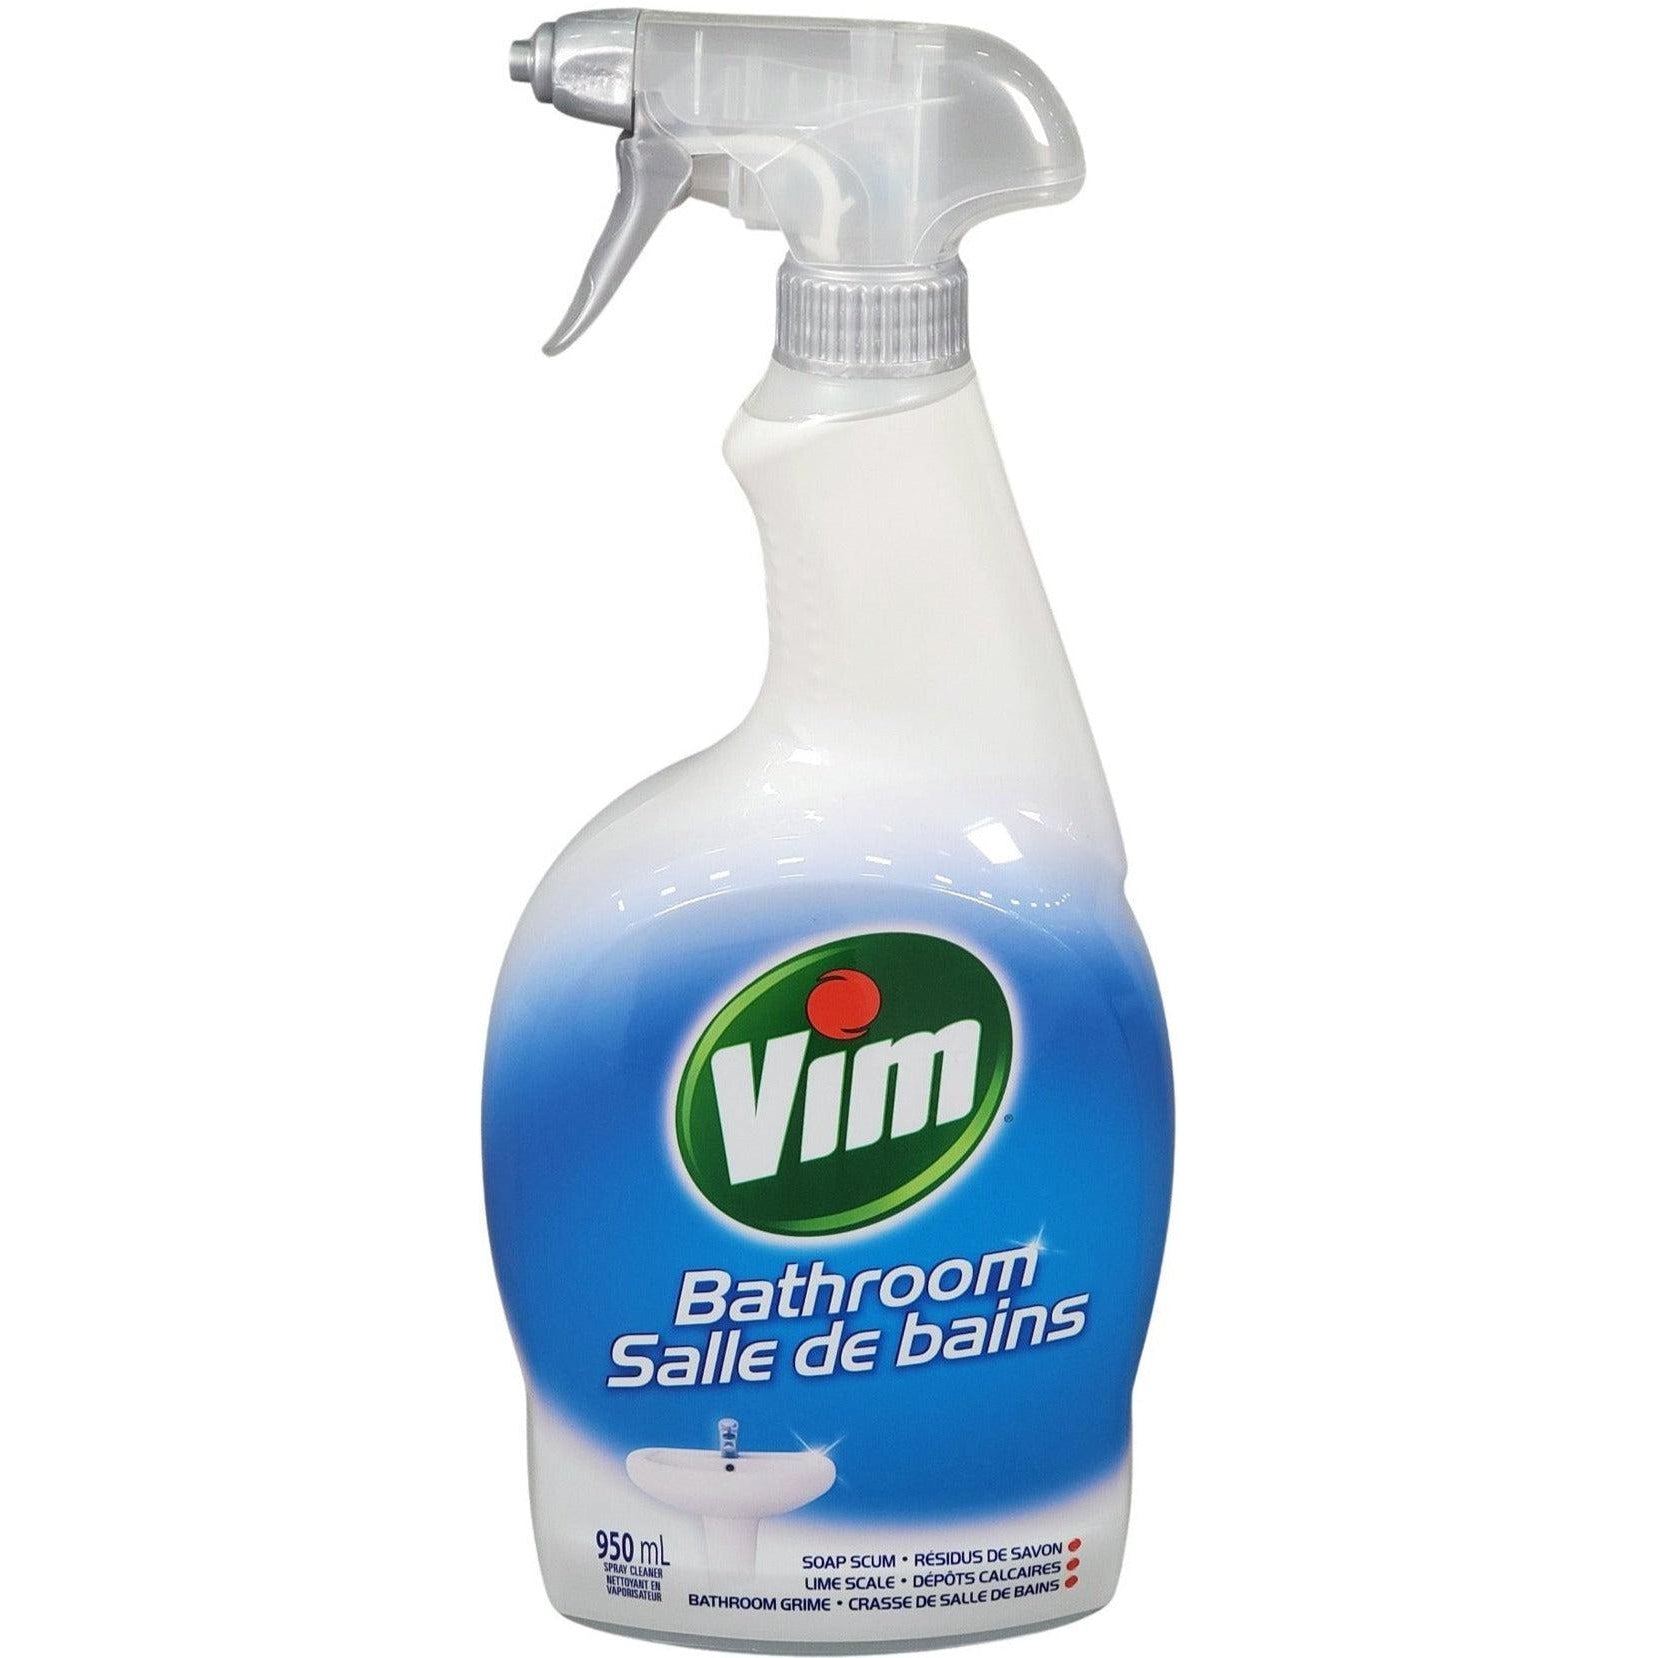 Vim Power & Shine Spray Cleaner removes limescale and soap scum